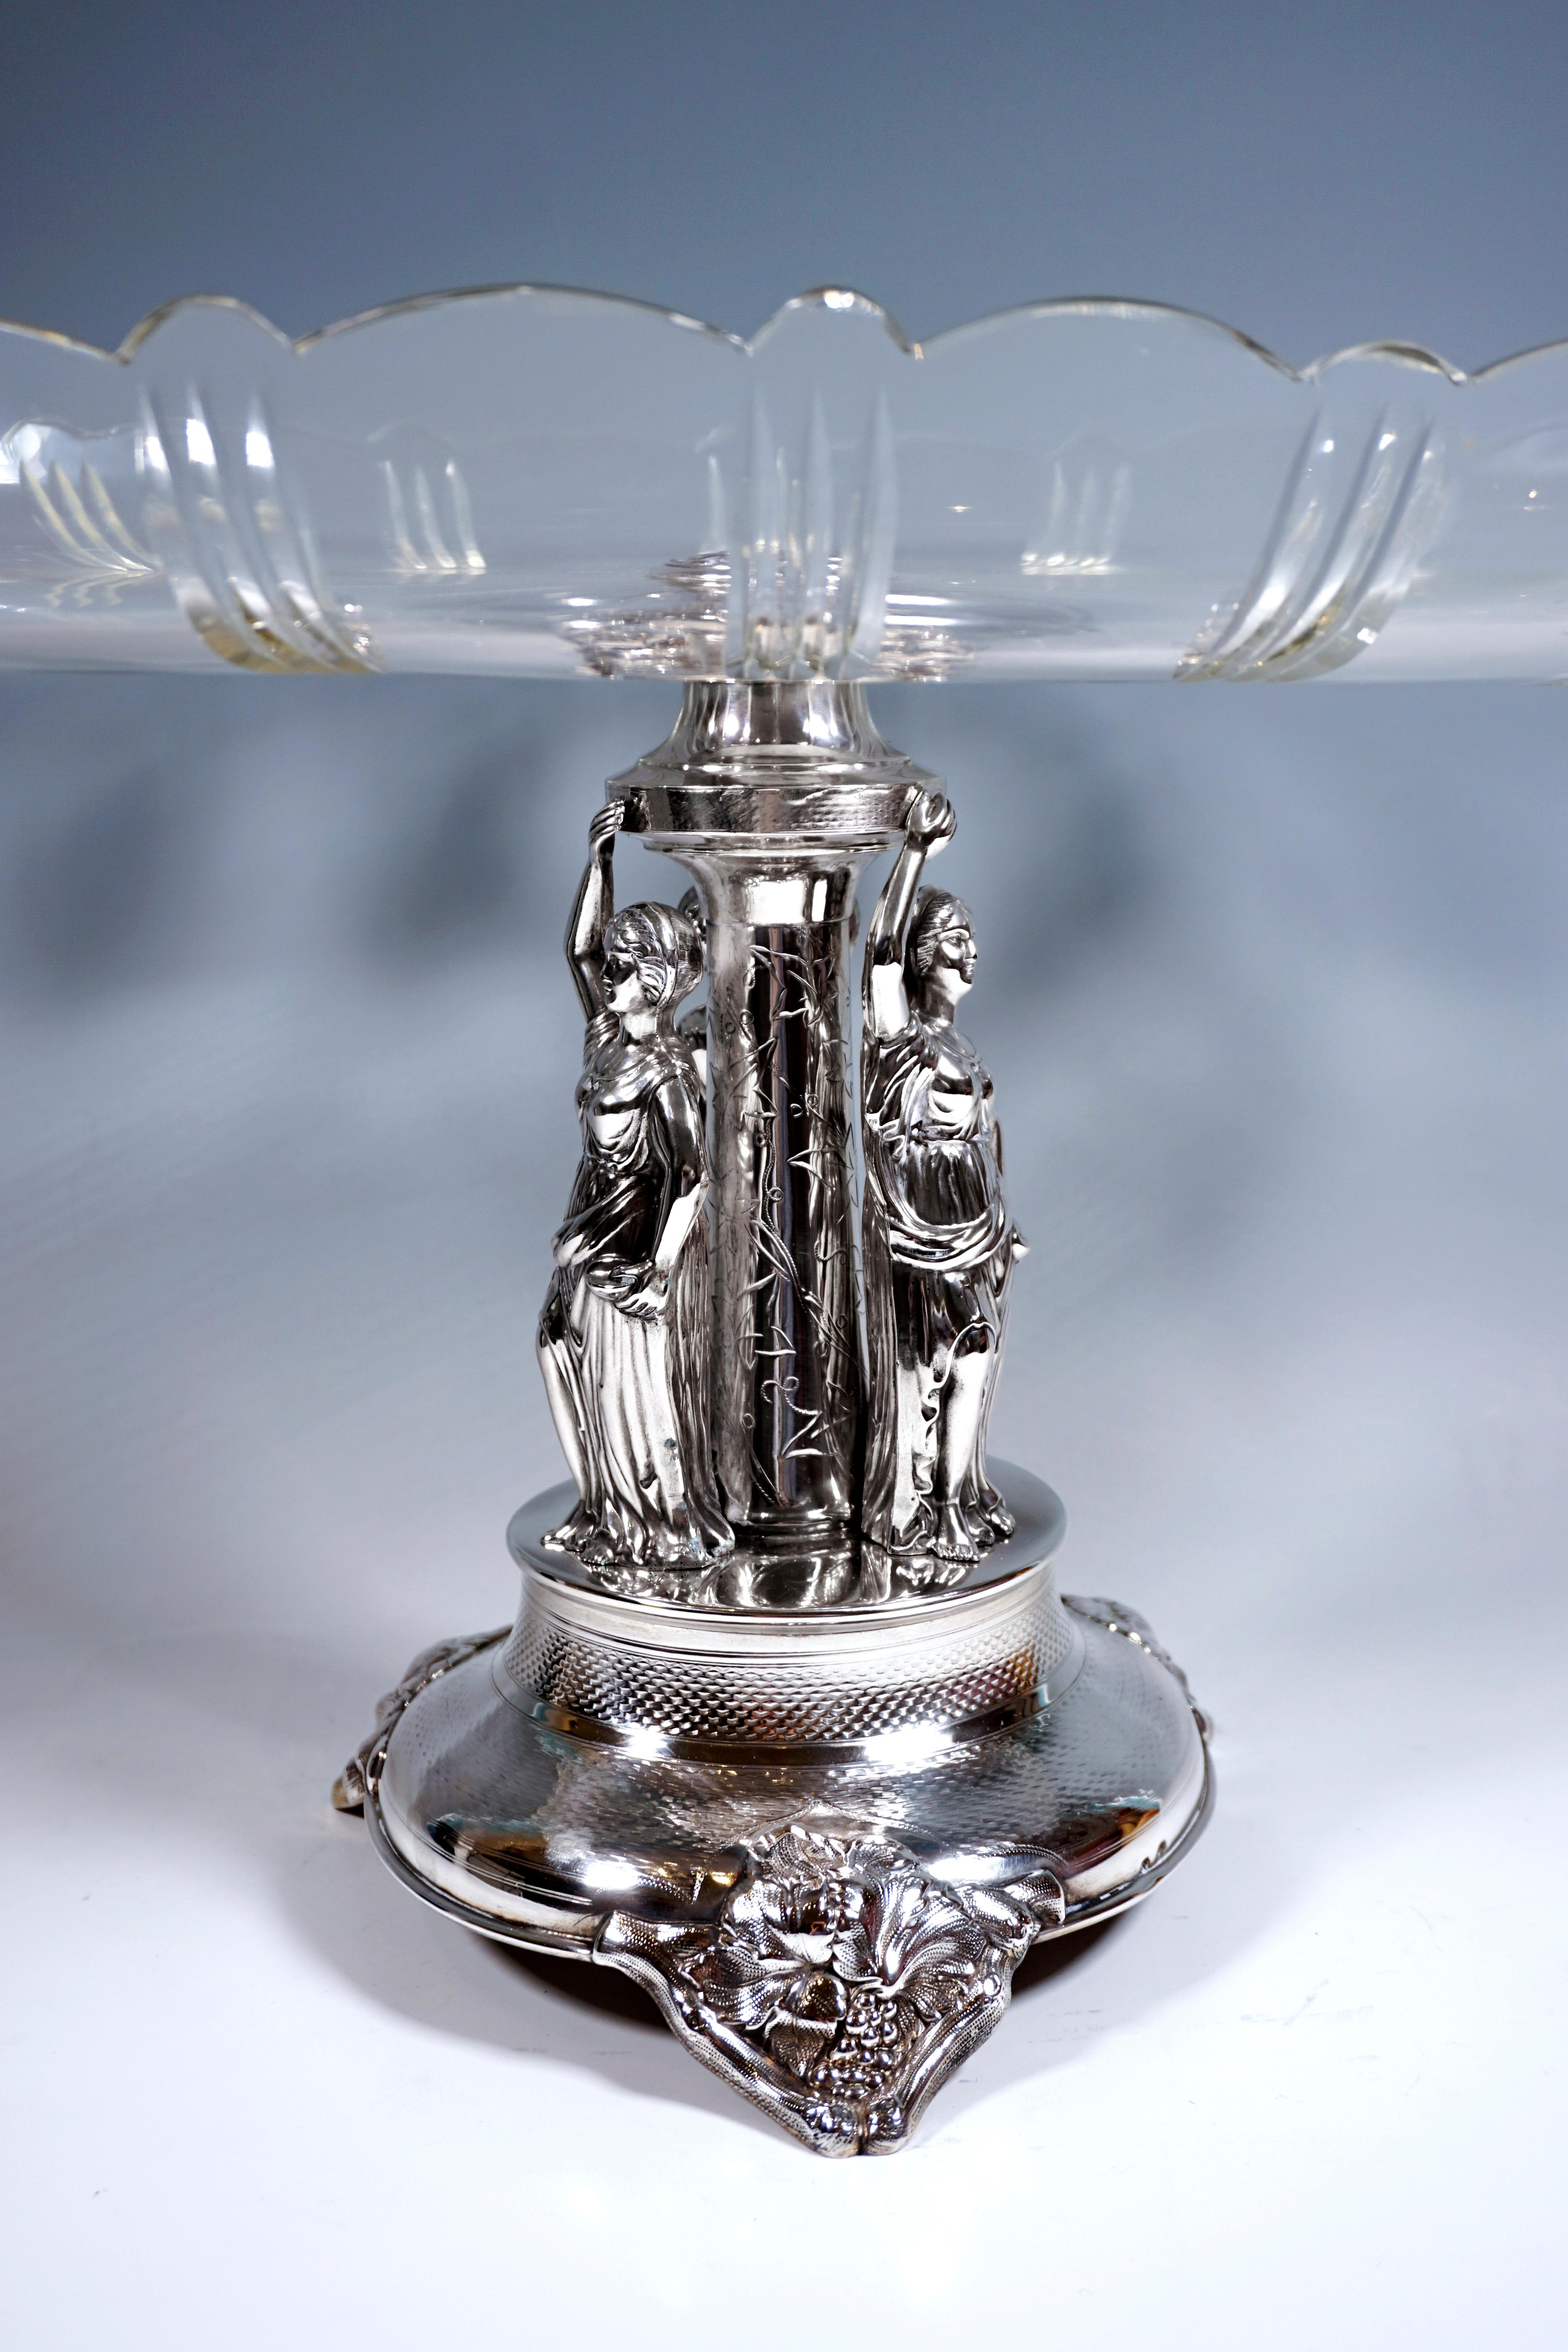 Early 20th Century Art Nouveau Silver Centerpiece with Karyatides and Glass Bowl, Vienna, ca 1900 For Sale